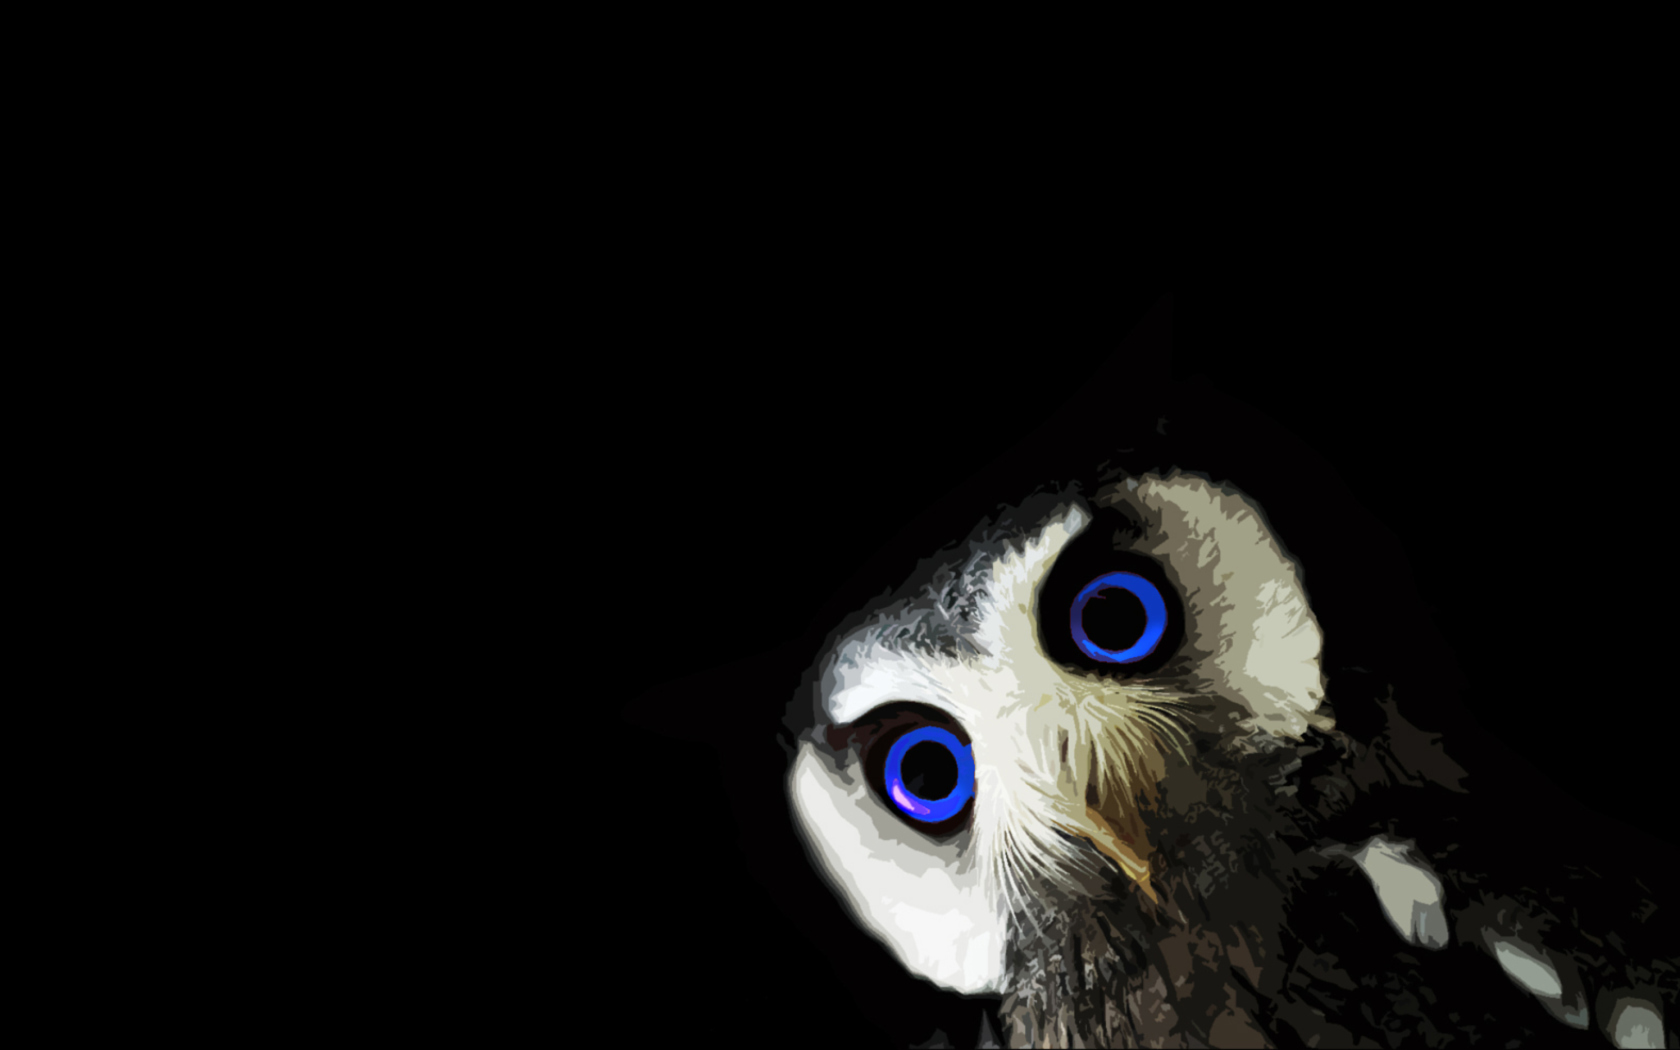 Funny Owl With Big Blue Eyes wallpaper 1680x1050